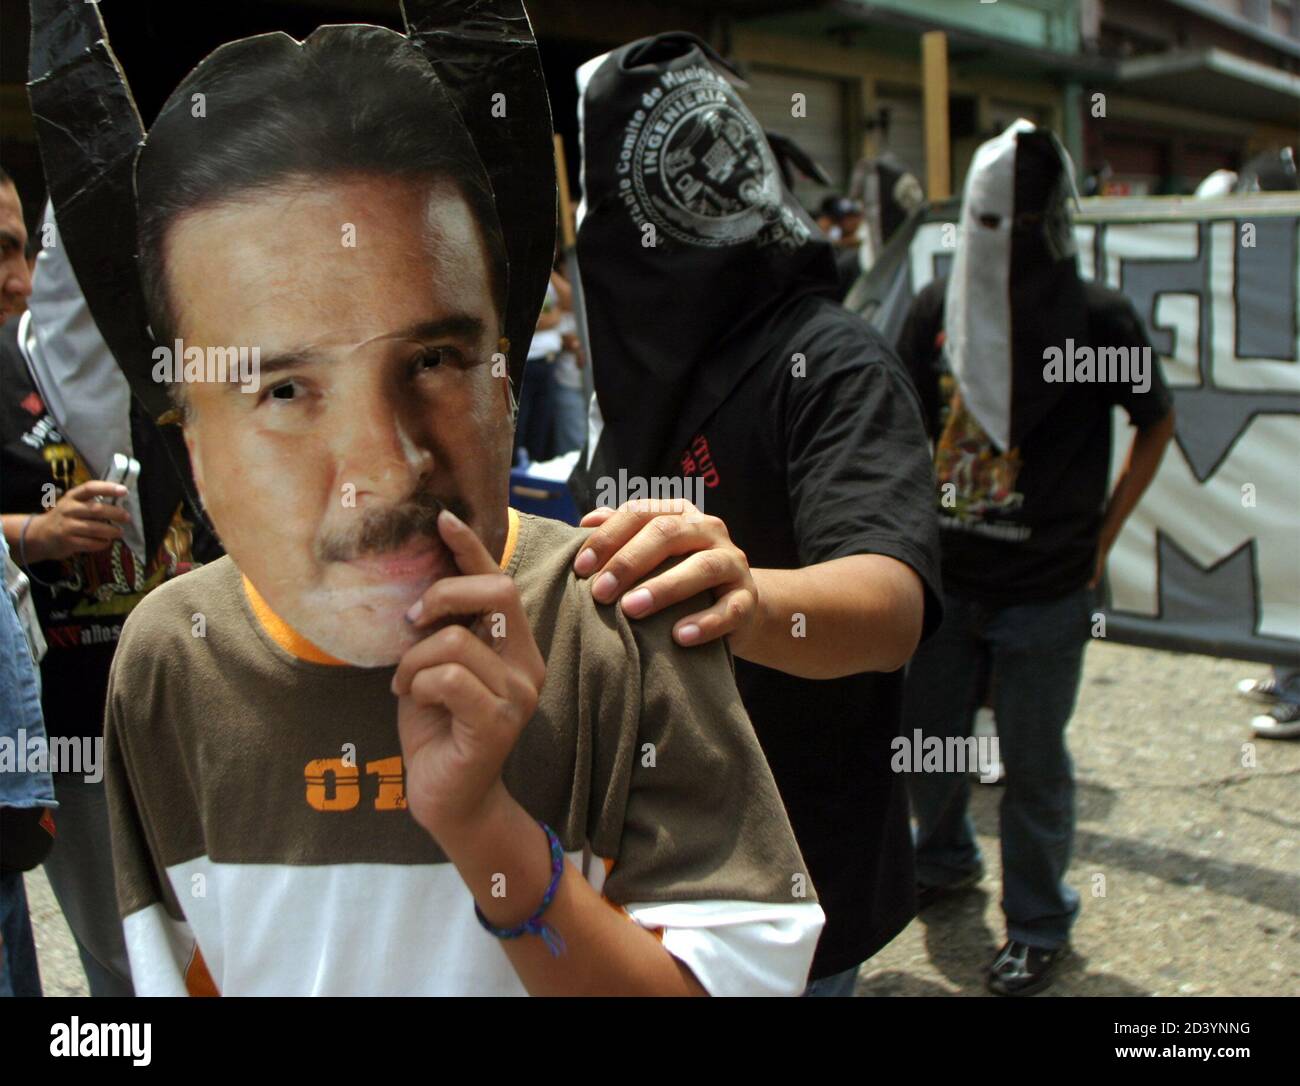 A STUDENT WEARS A MASK OF EX-GUATEMALAN PRESIDENT ALFONSO PORTILLO DURING THE ANNUAL 'HUELGA DE LOS DOLORES' PARADE.  A student from the University of San Carlos wears a mask of ex-Guatemalan president Alfonso Portillo during the annual 'Huelga de los Dolores' parade April 2, 2004 in Guatemala City. The event, a tradition for 106 years, is now used by the students as a chance to air their grievances against the government. REUTERS/Daniel LeClair Stock Photo